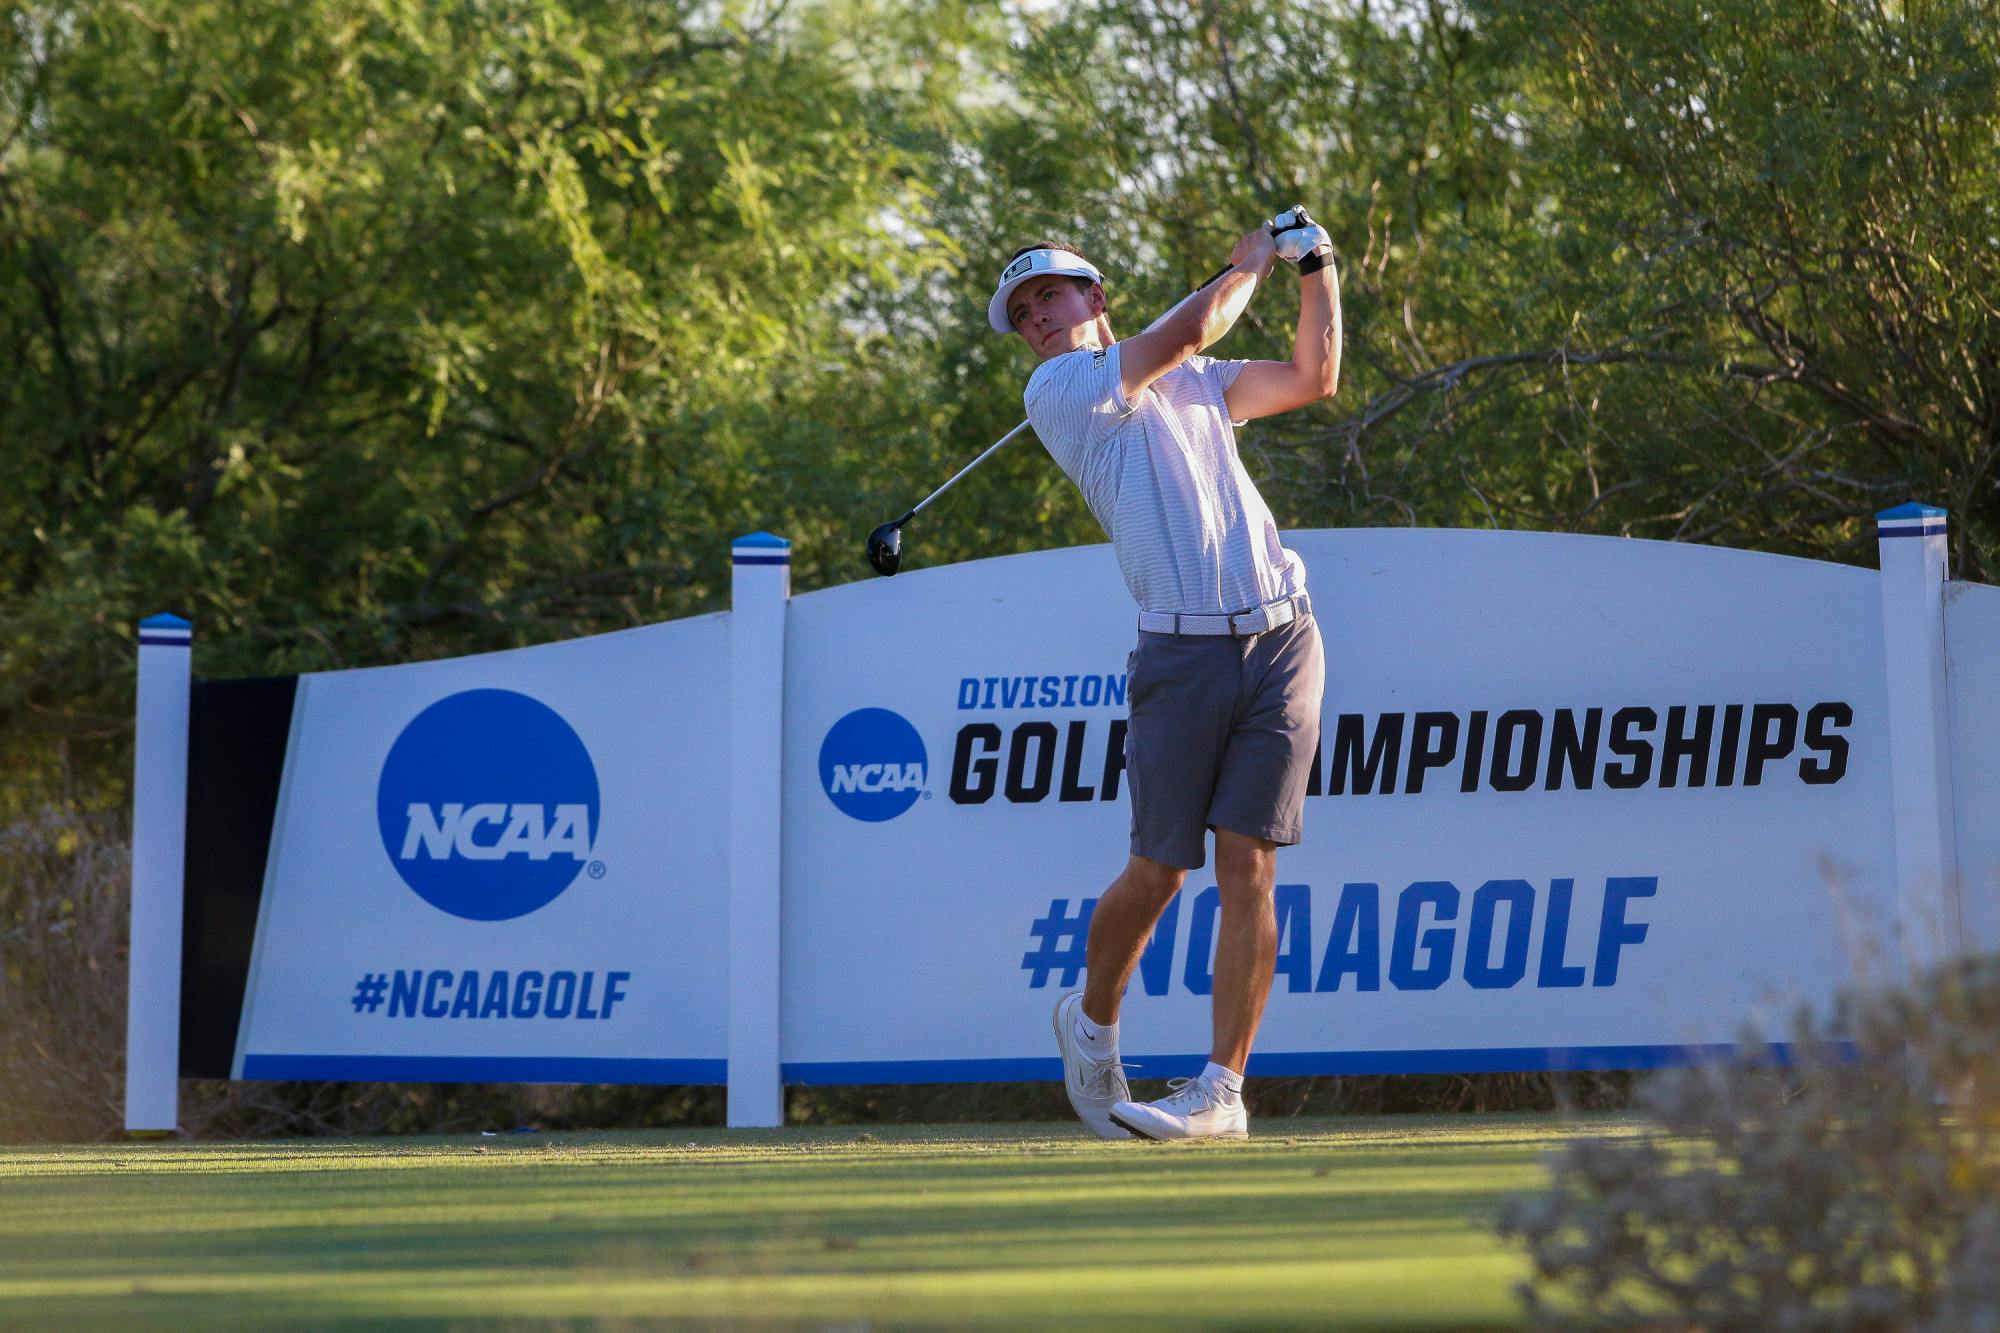 <p>James Piot tees off at the NCAA Championship at Grayhawk Golf Course in Scottsdale, Arizona. - Courtesy of Spartan Athletics </p>